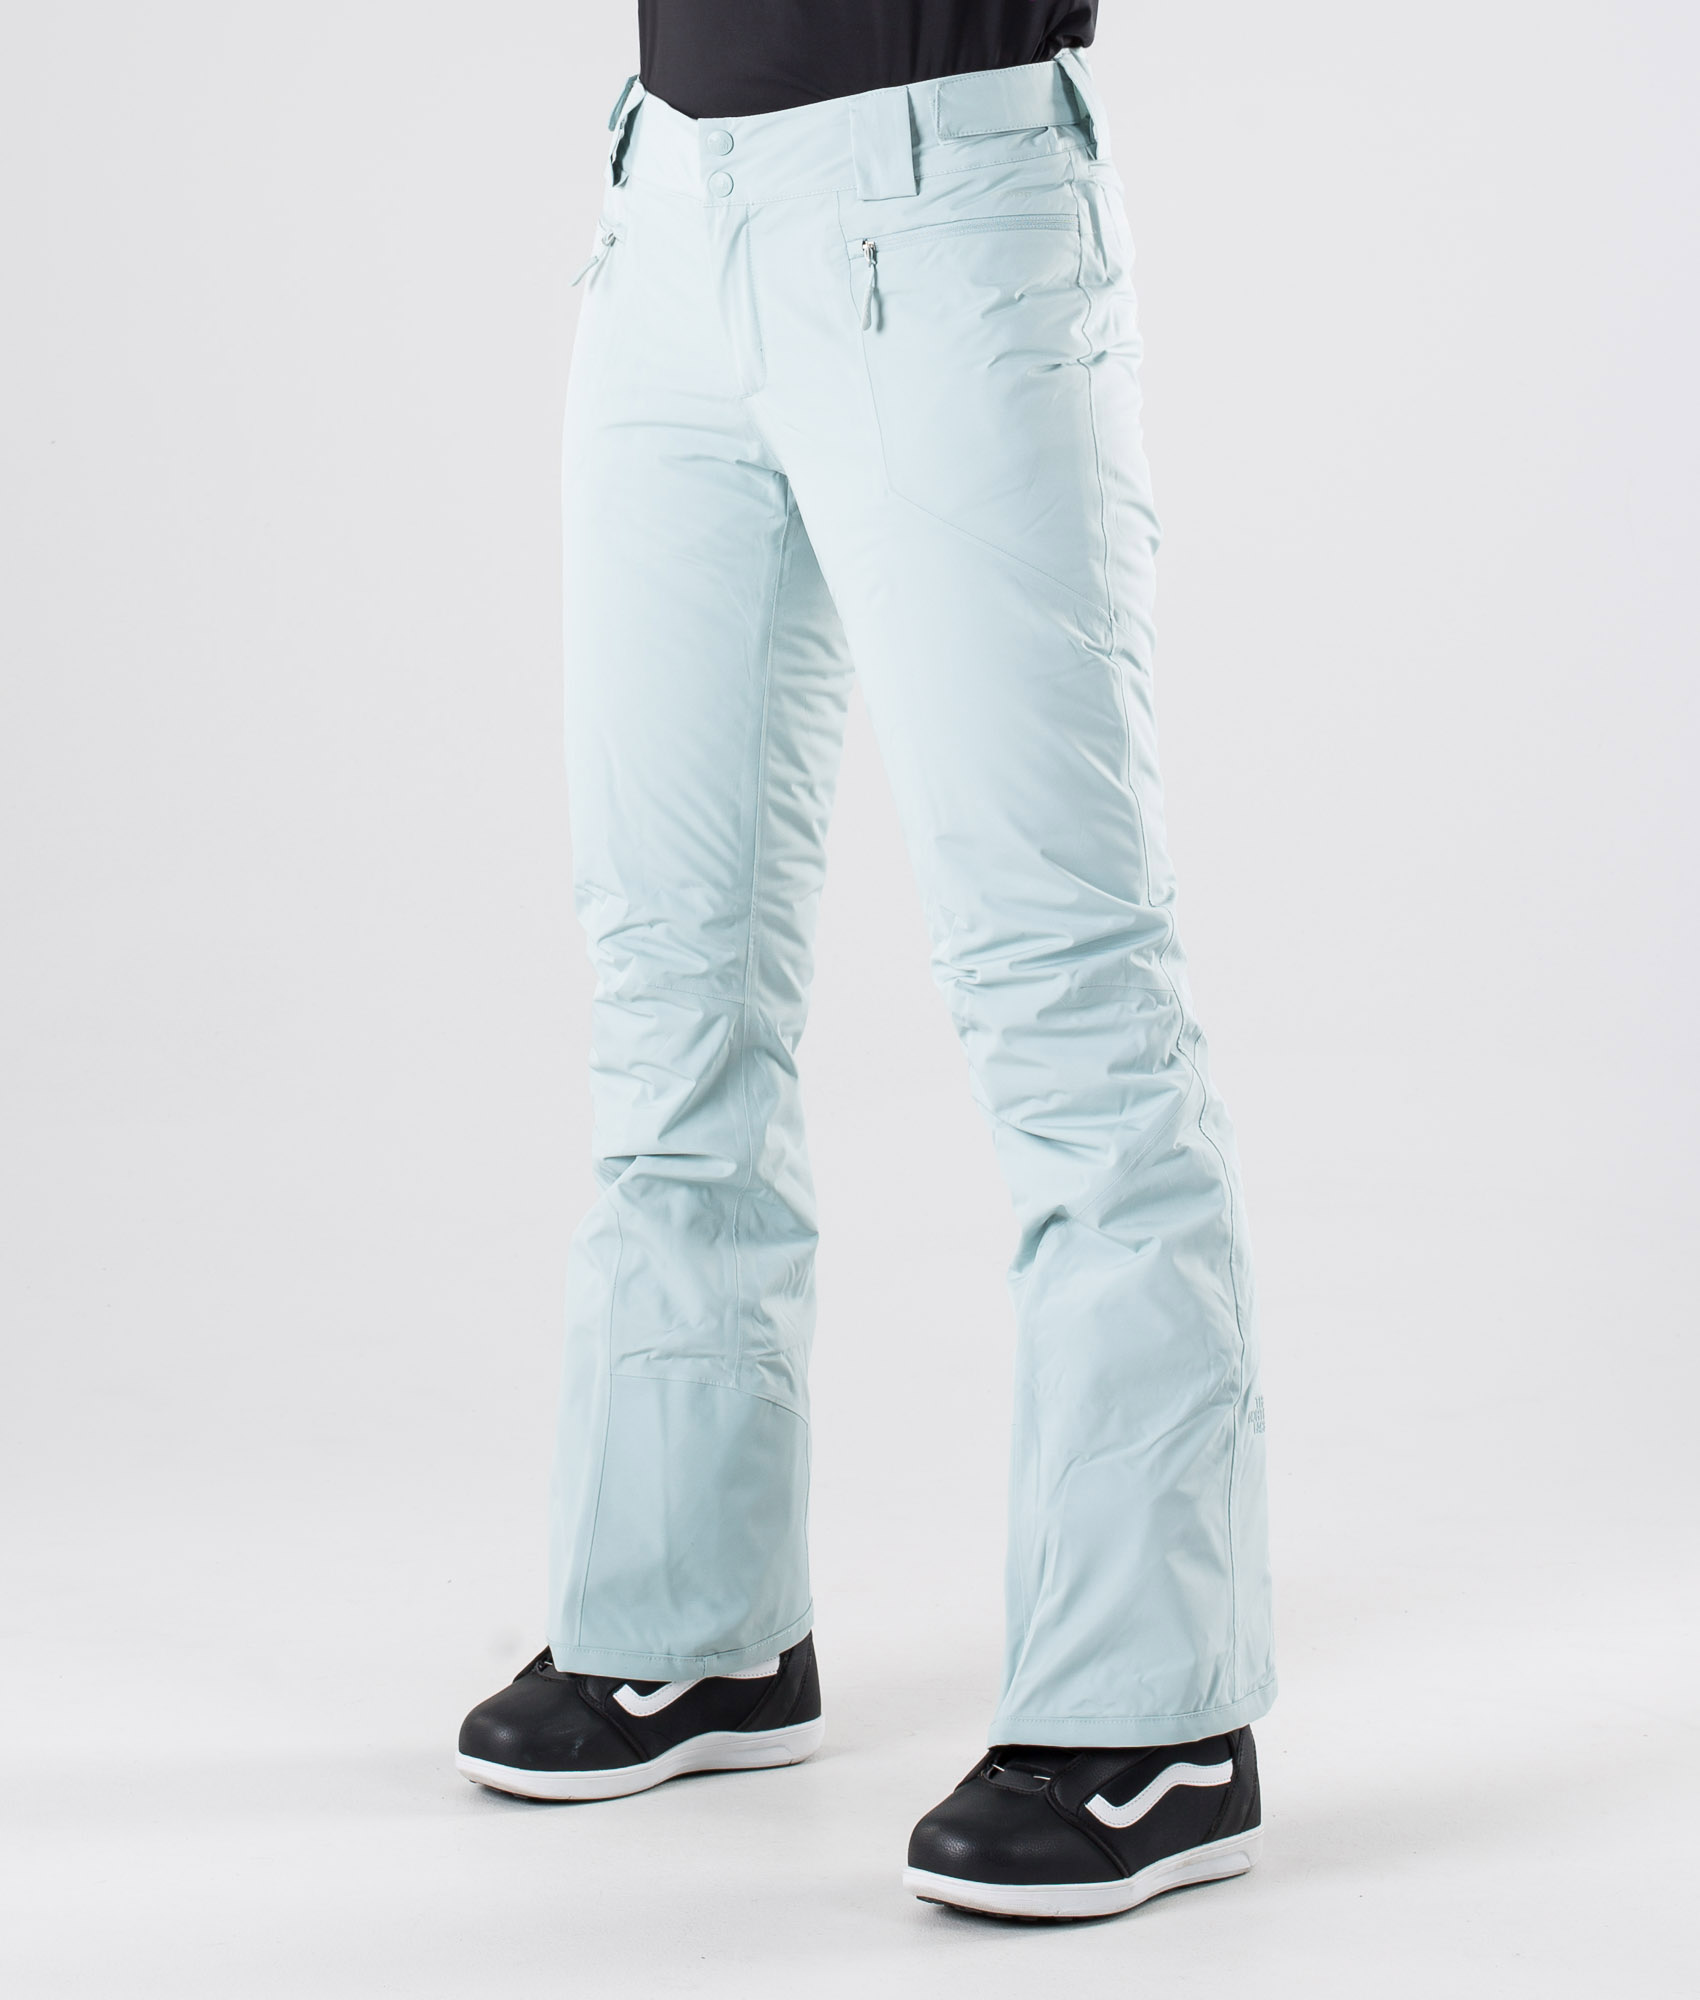 north face snow pant